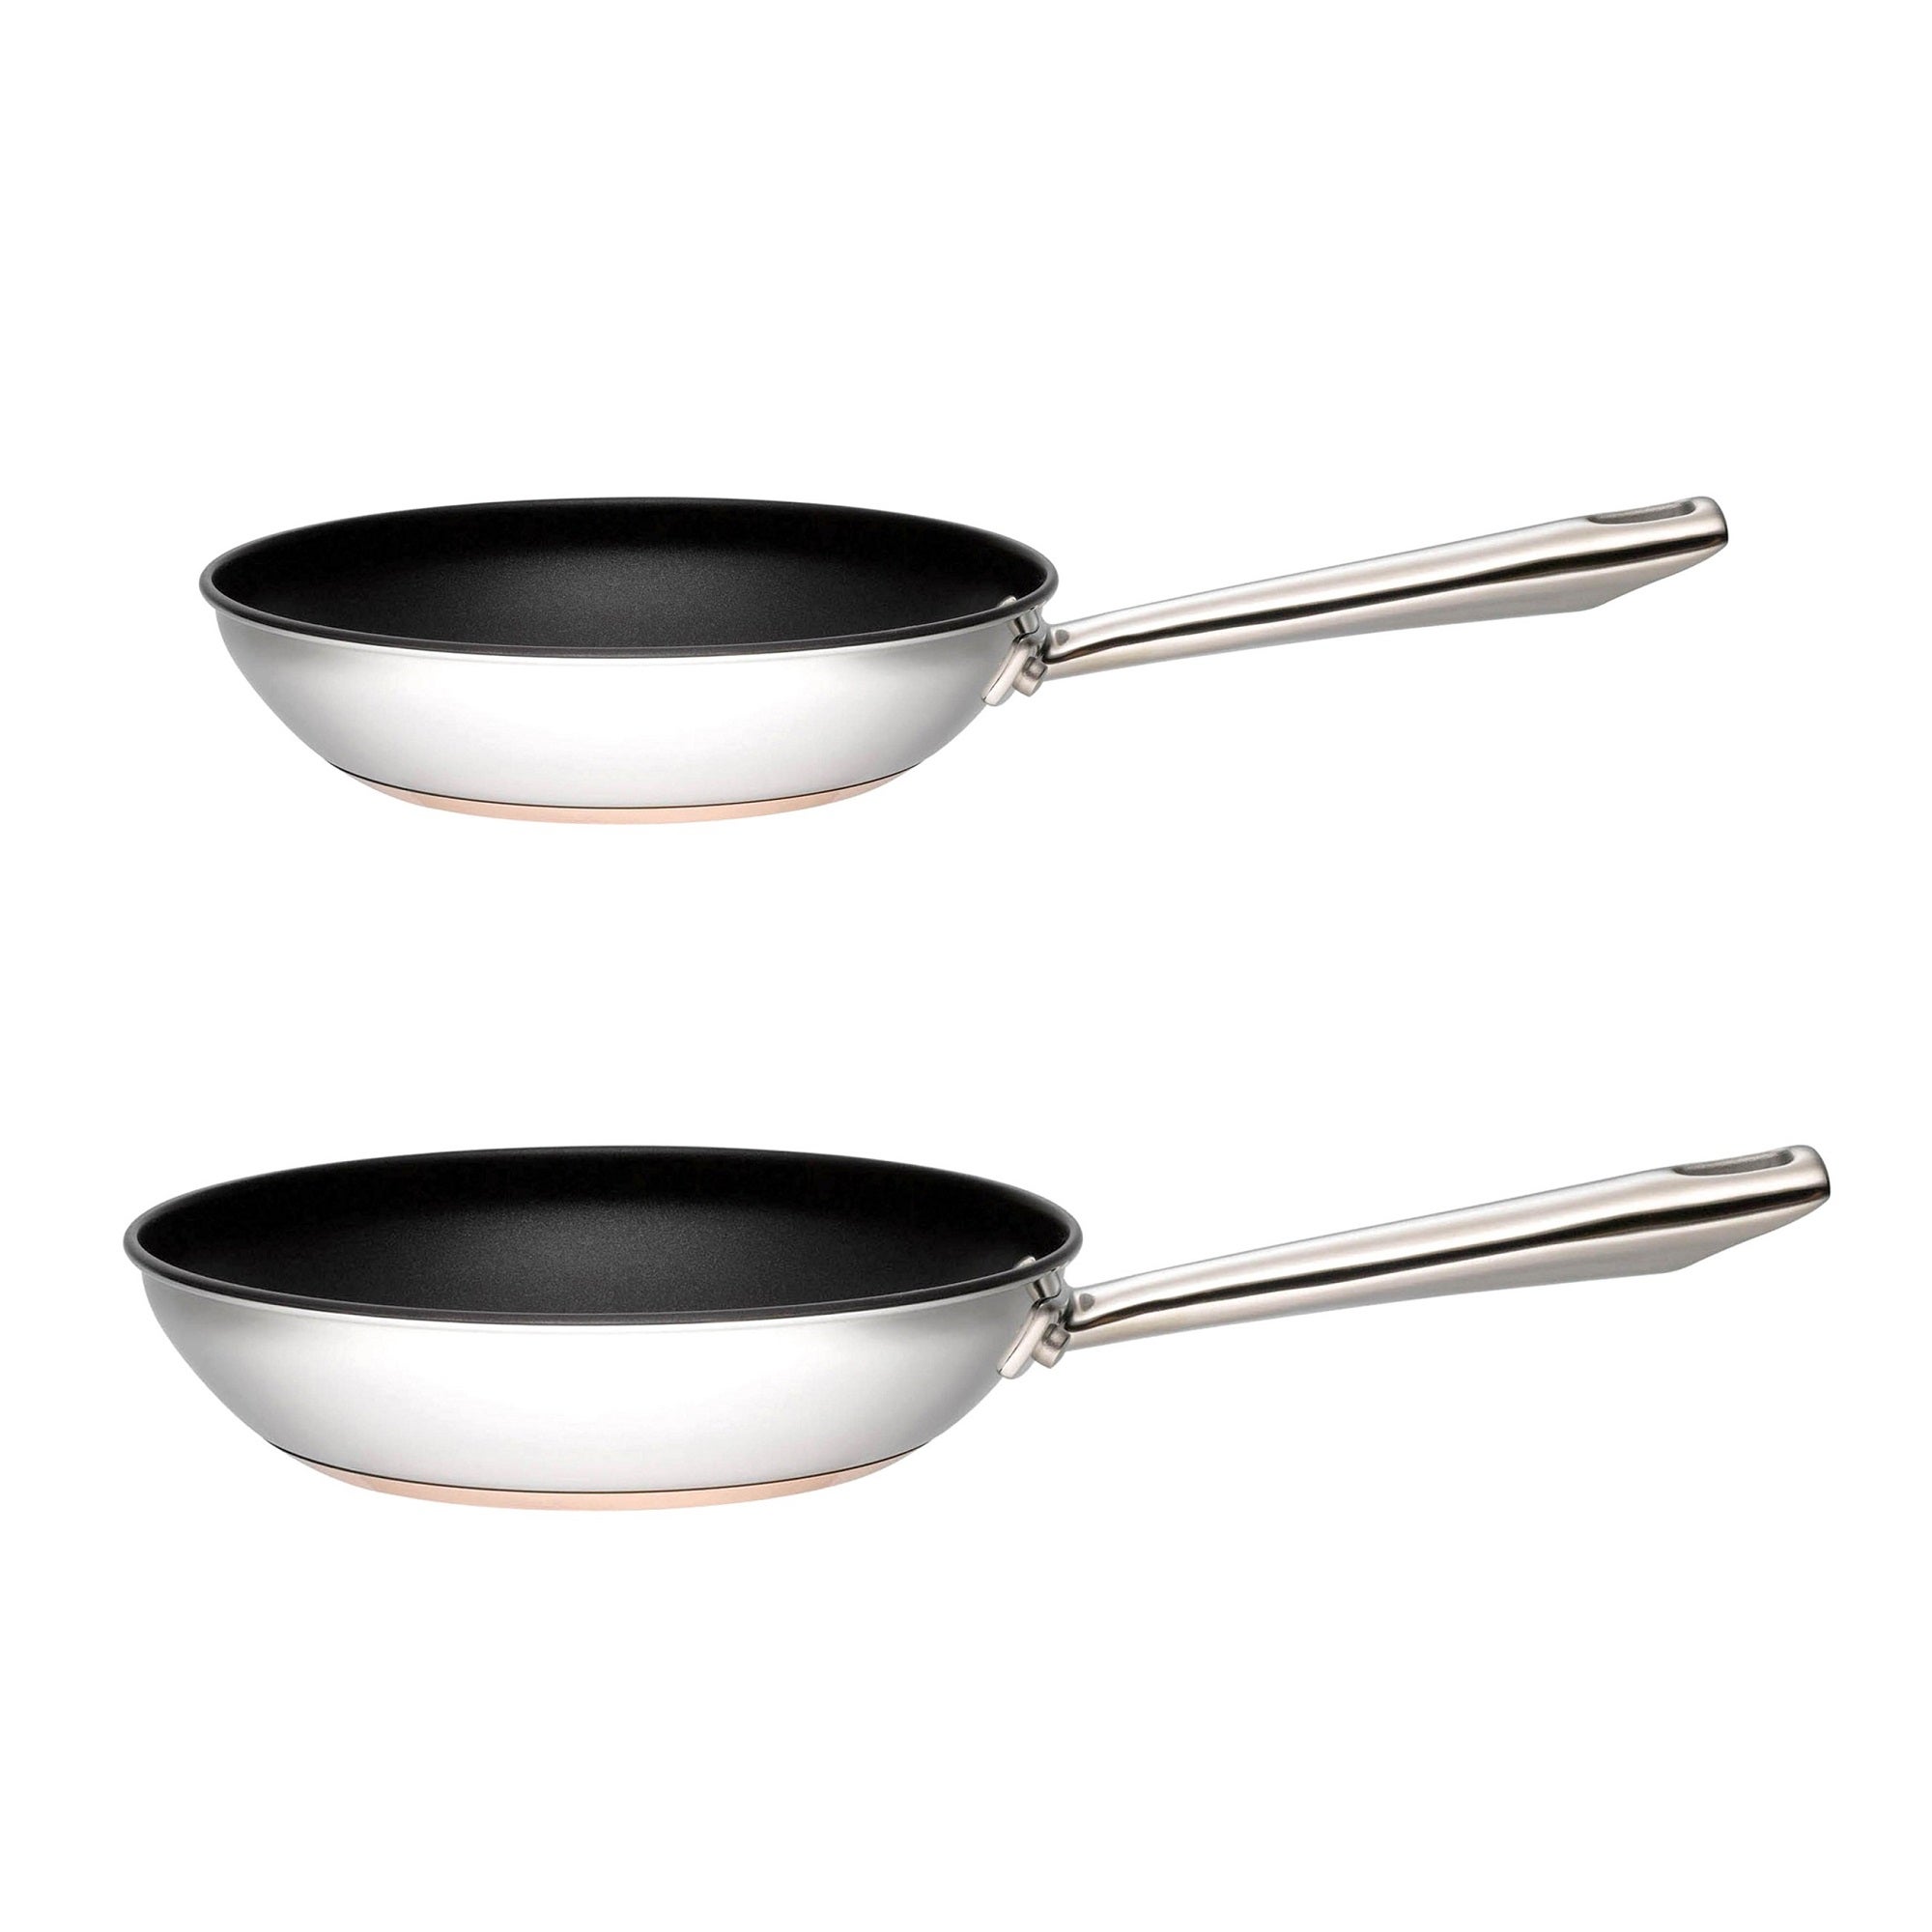 Copper Base Non-Stick Stainless Steel 2 Piece Frying Pan Set